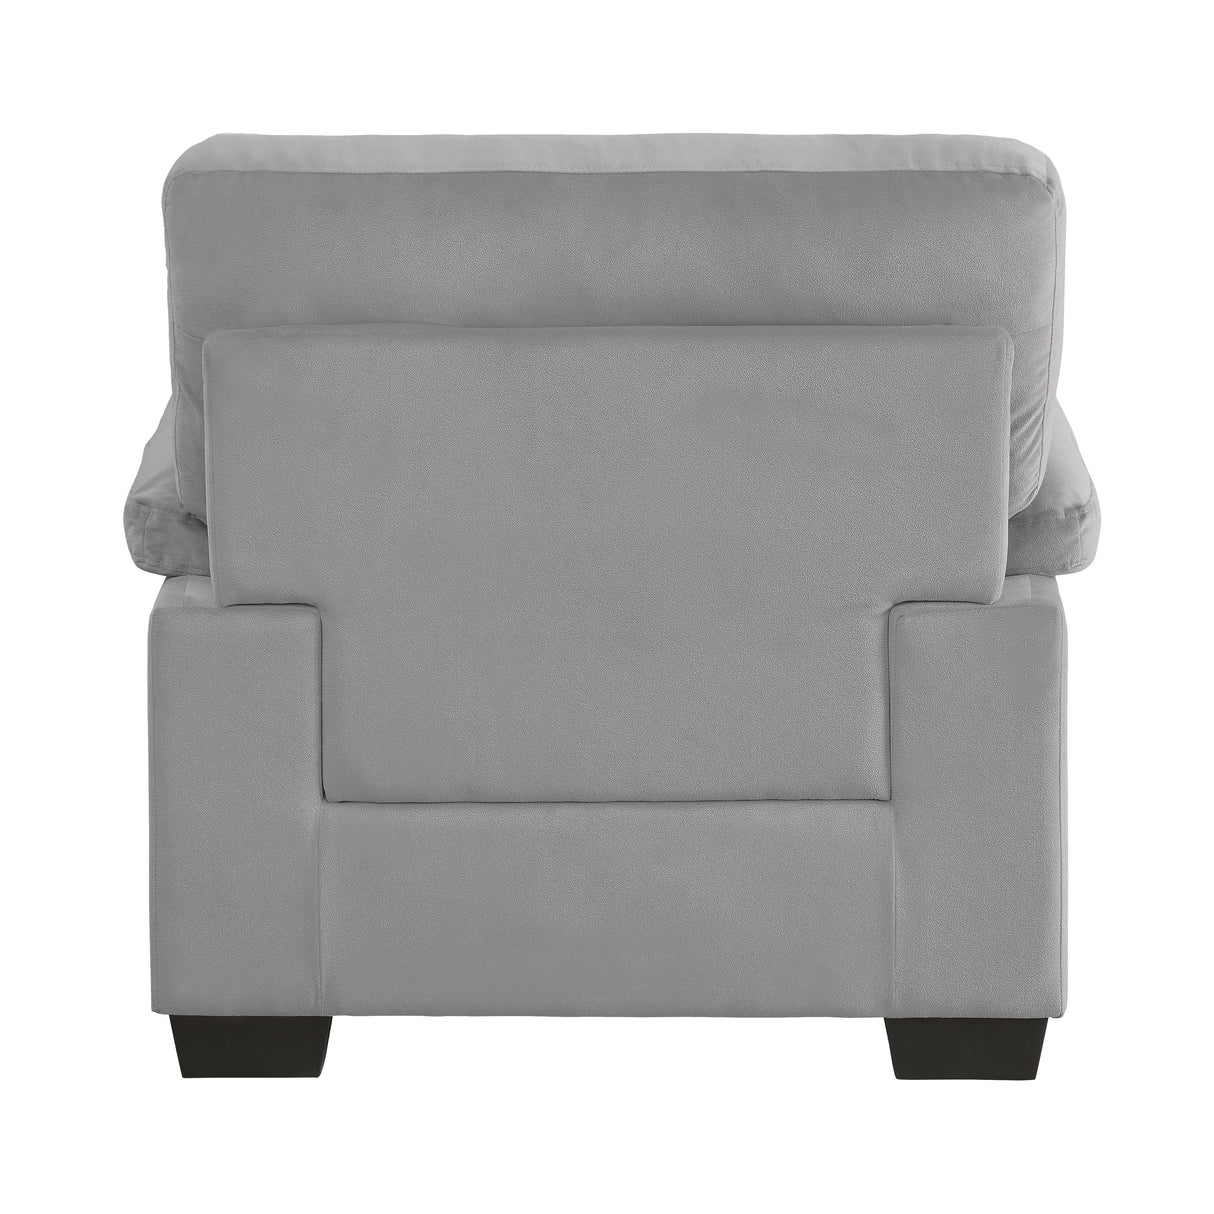 Keighly Gray Chair